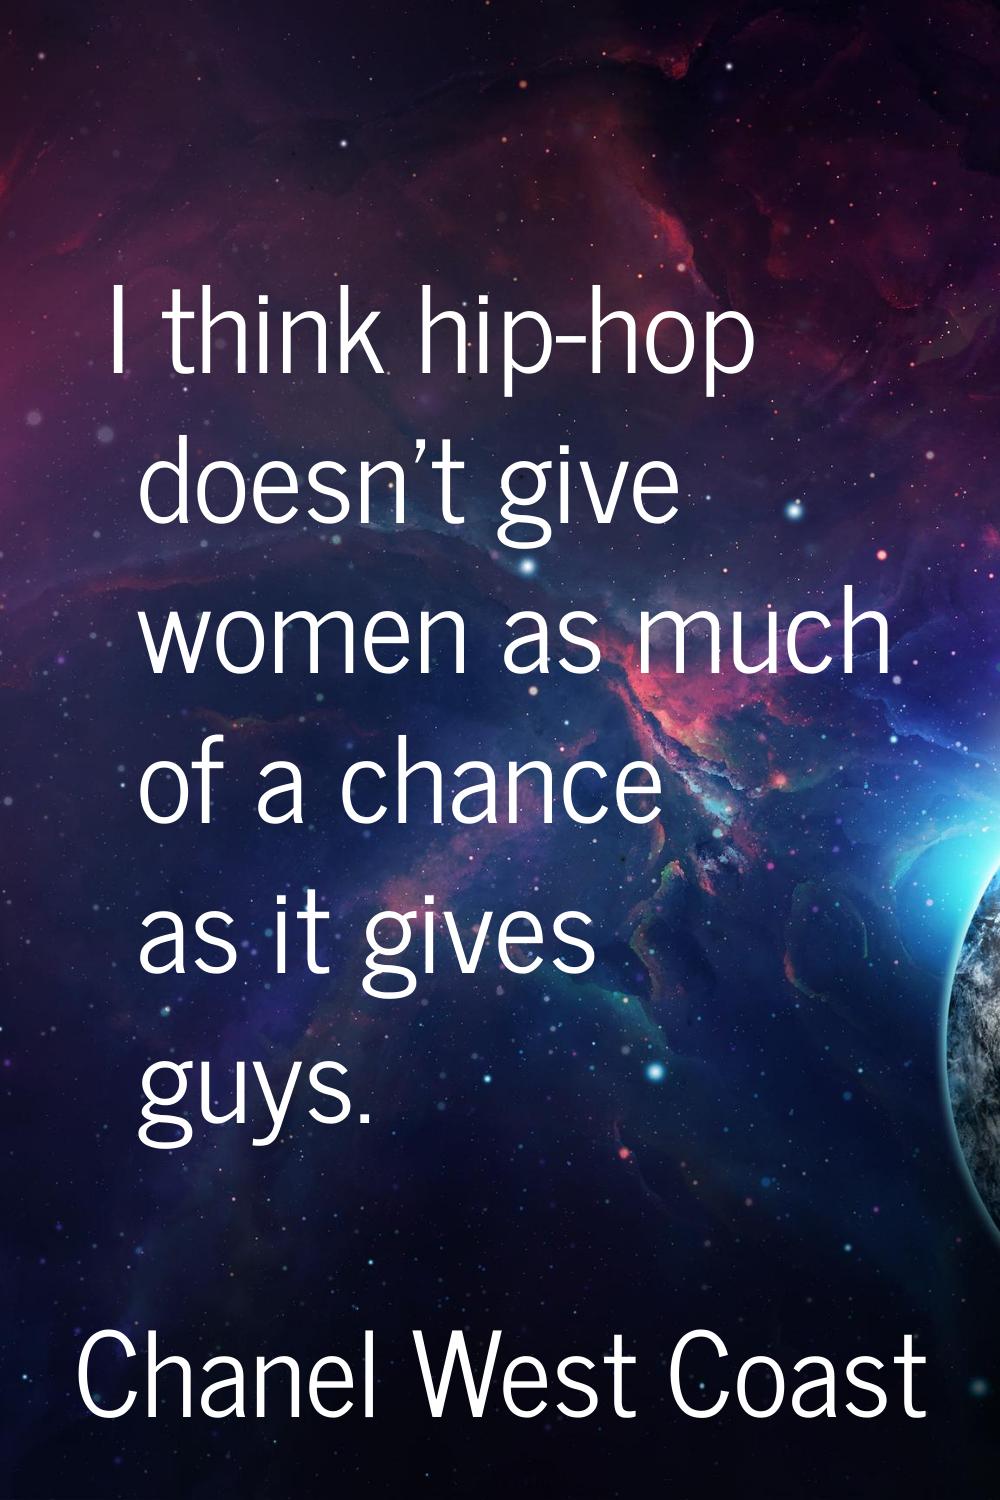 I think hip-hop doesn't give women as much of a chance as it gives guys.